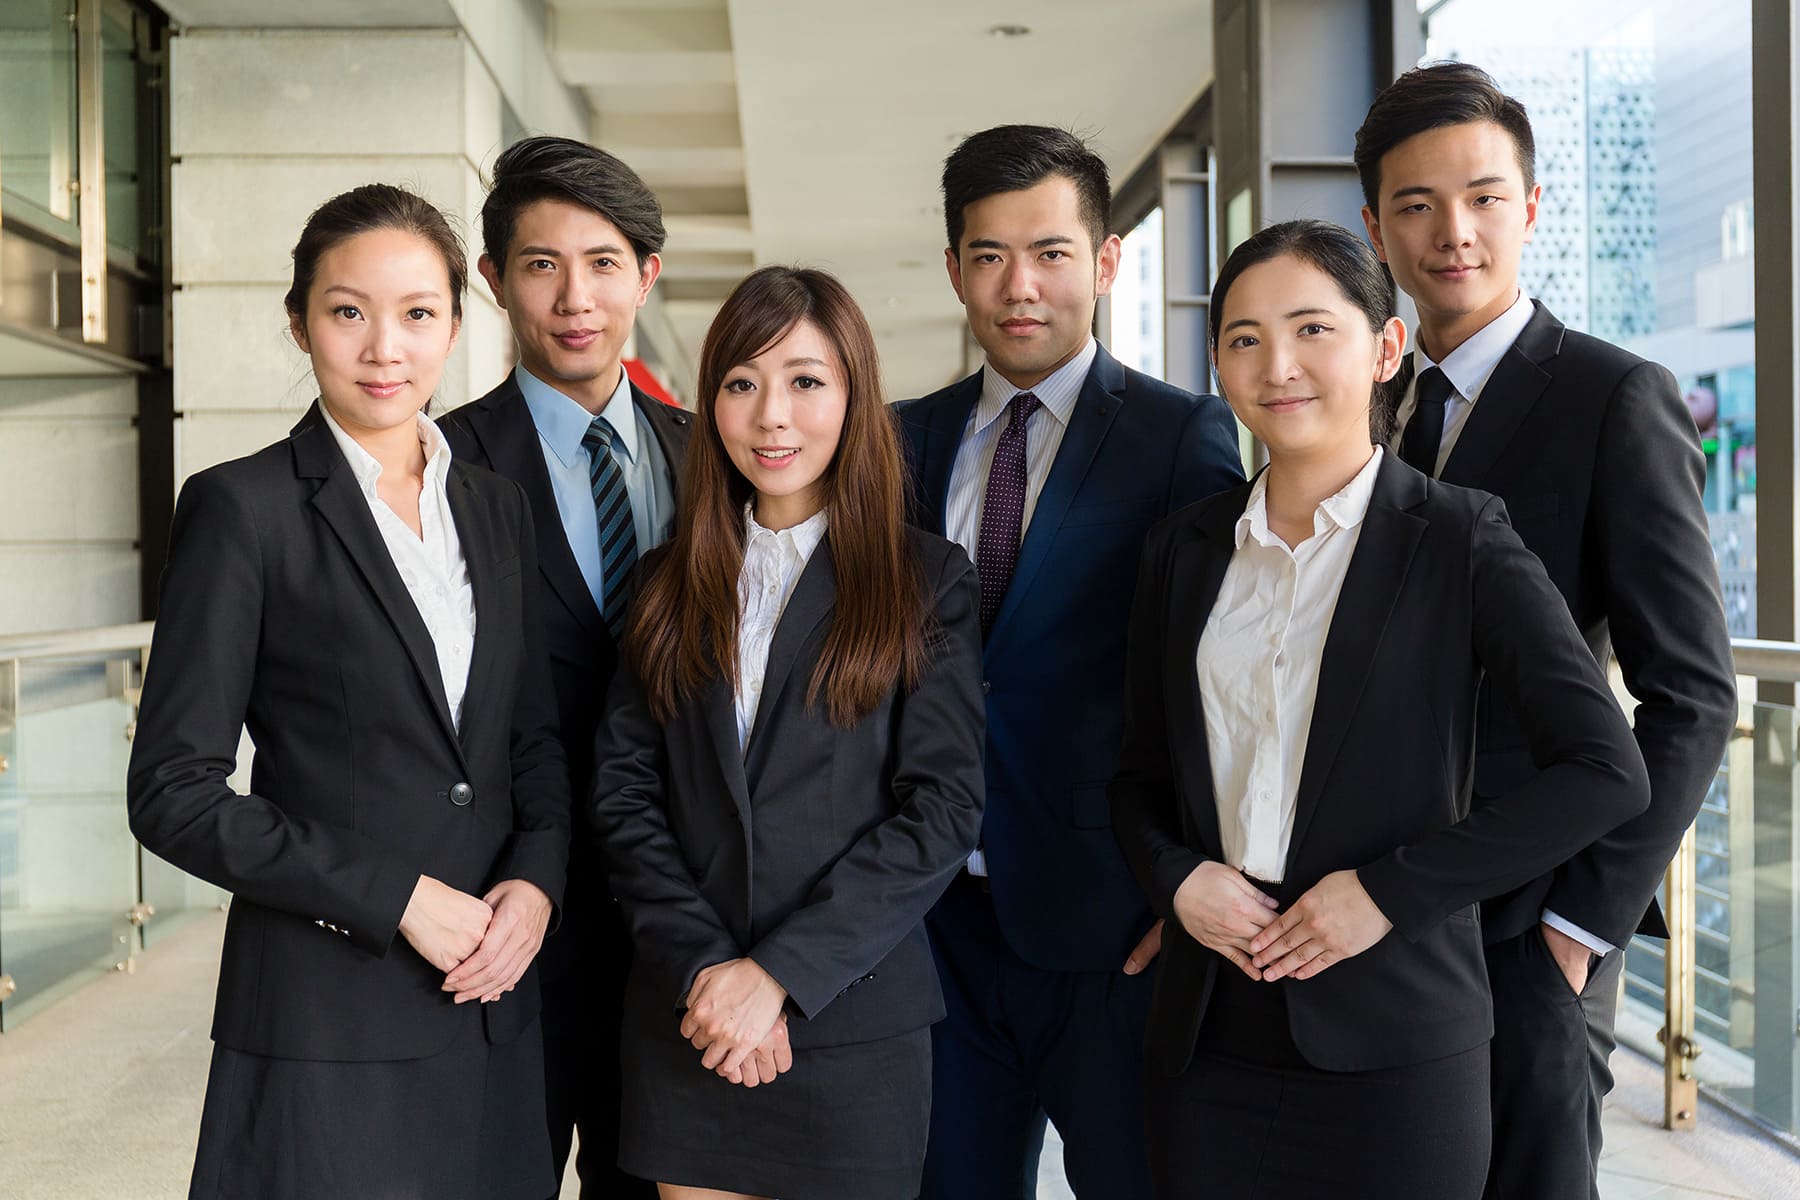 Men and woman in business formal attire - SGIP